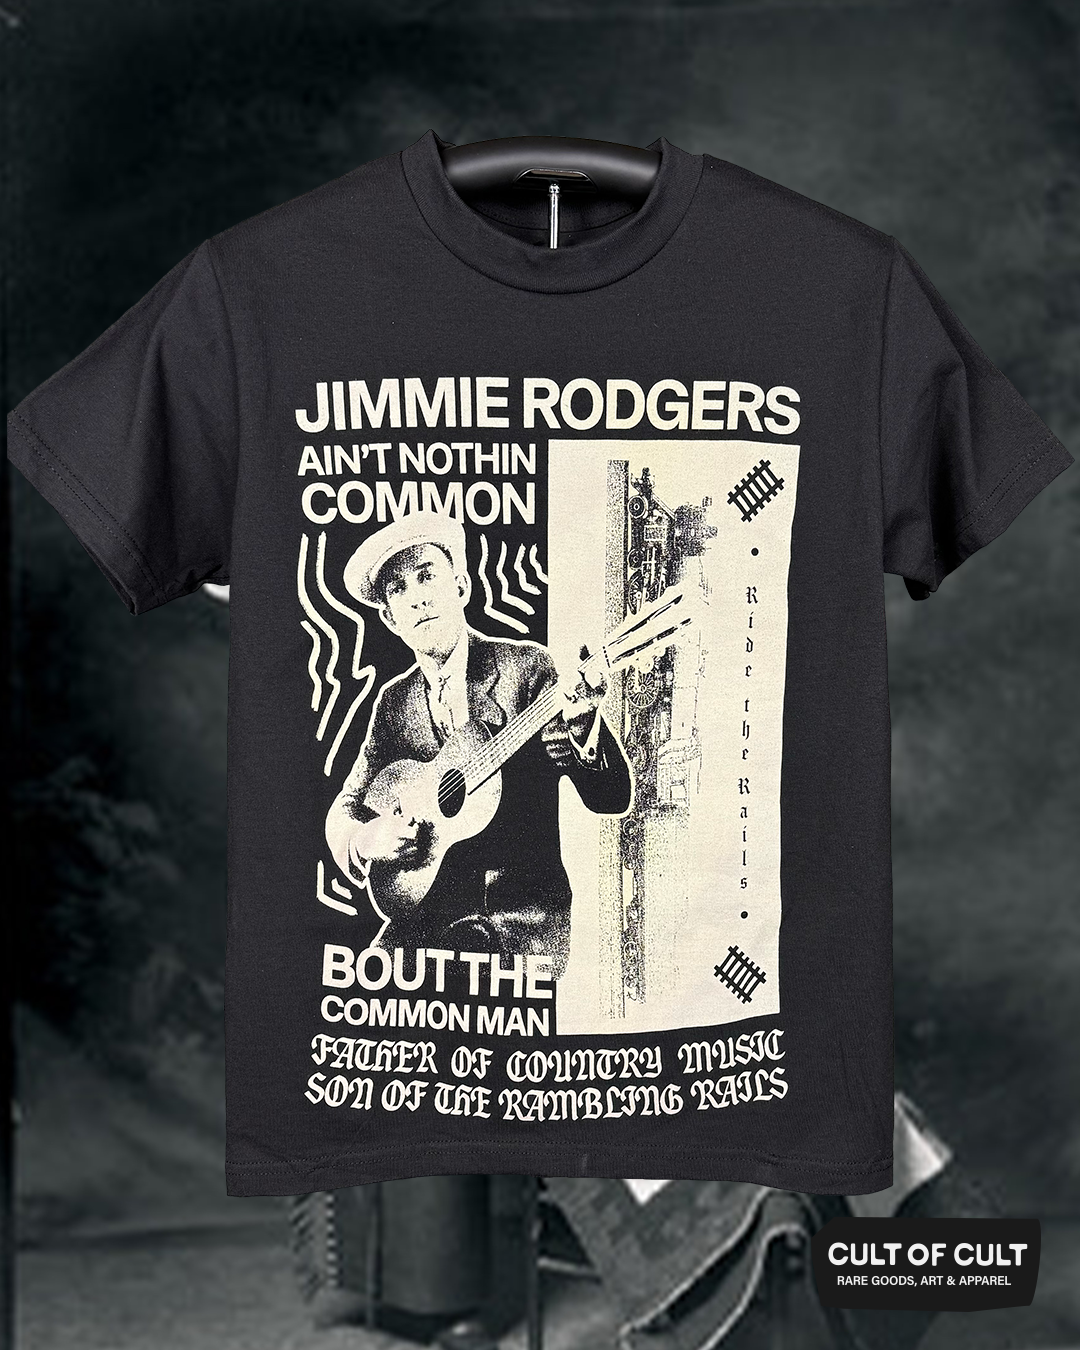 a front view of the Jimmie Rodgers black short sleeve shirt